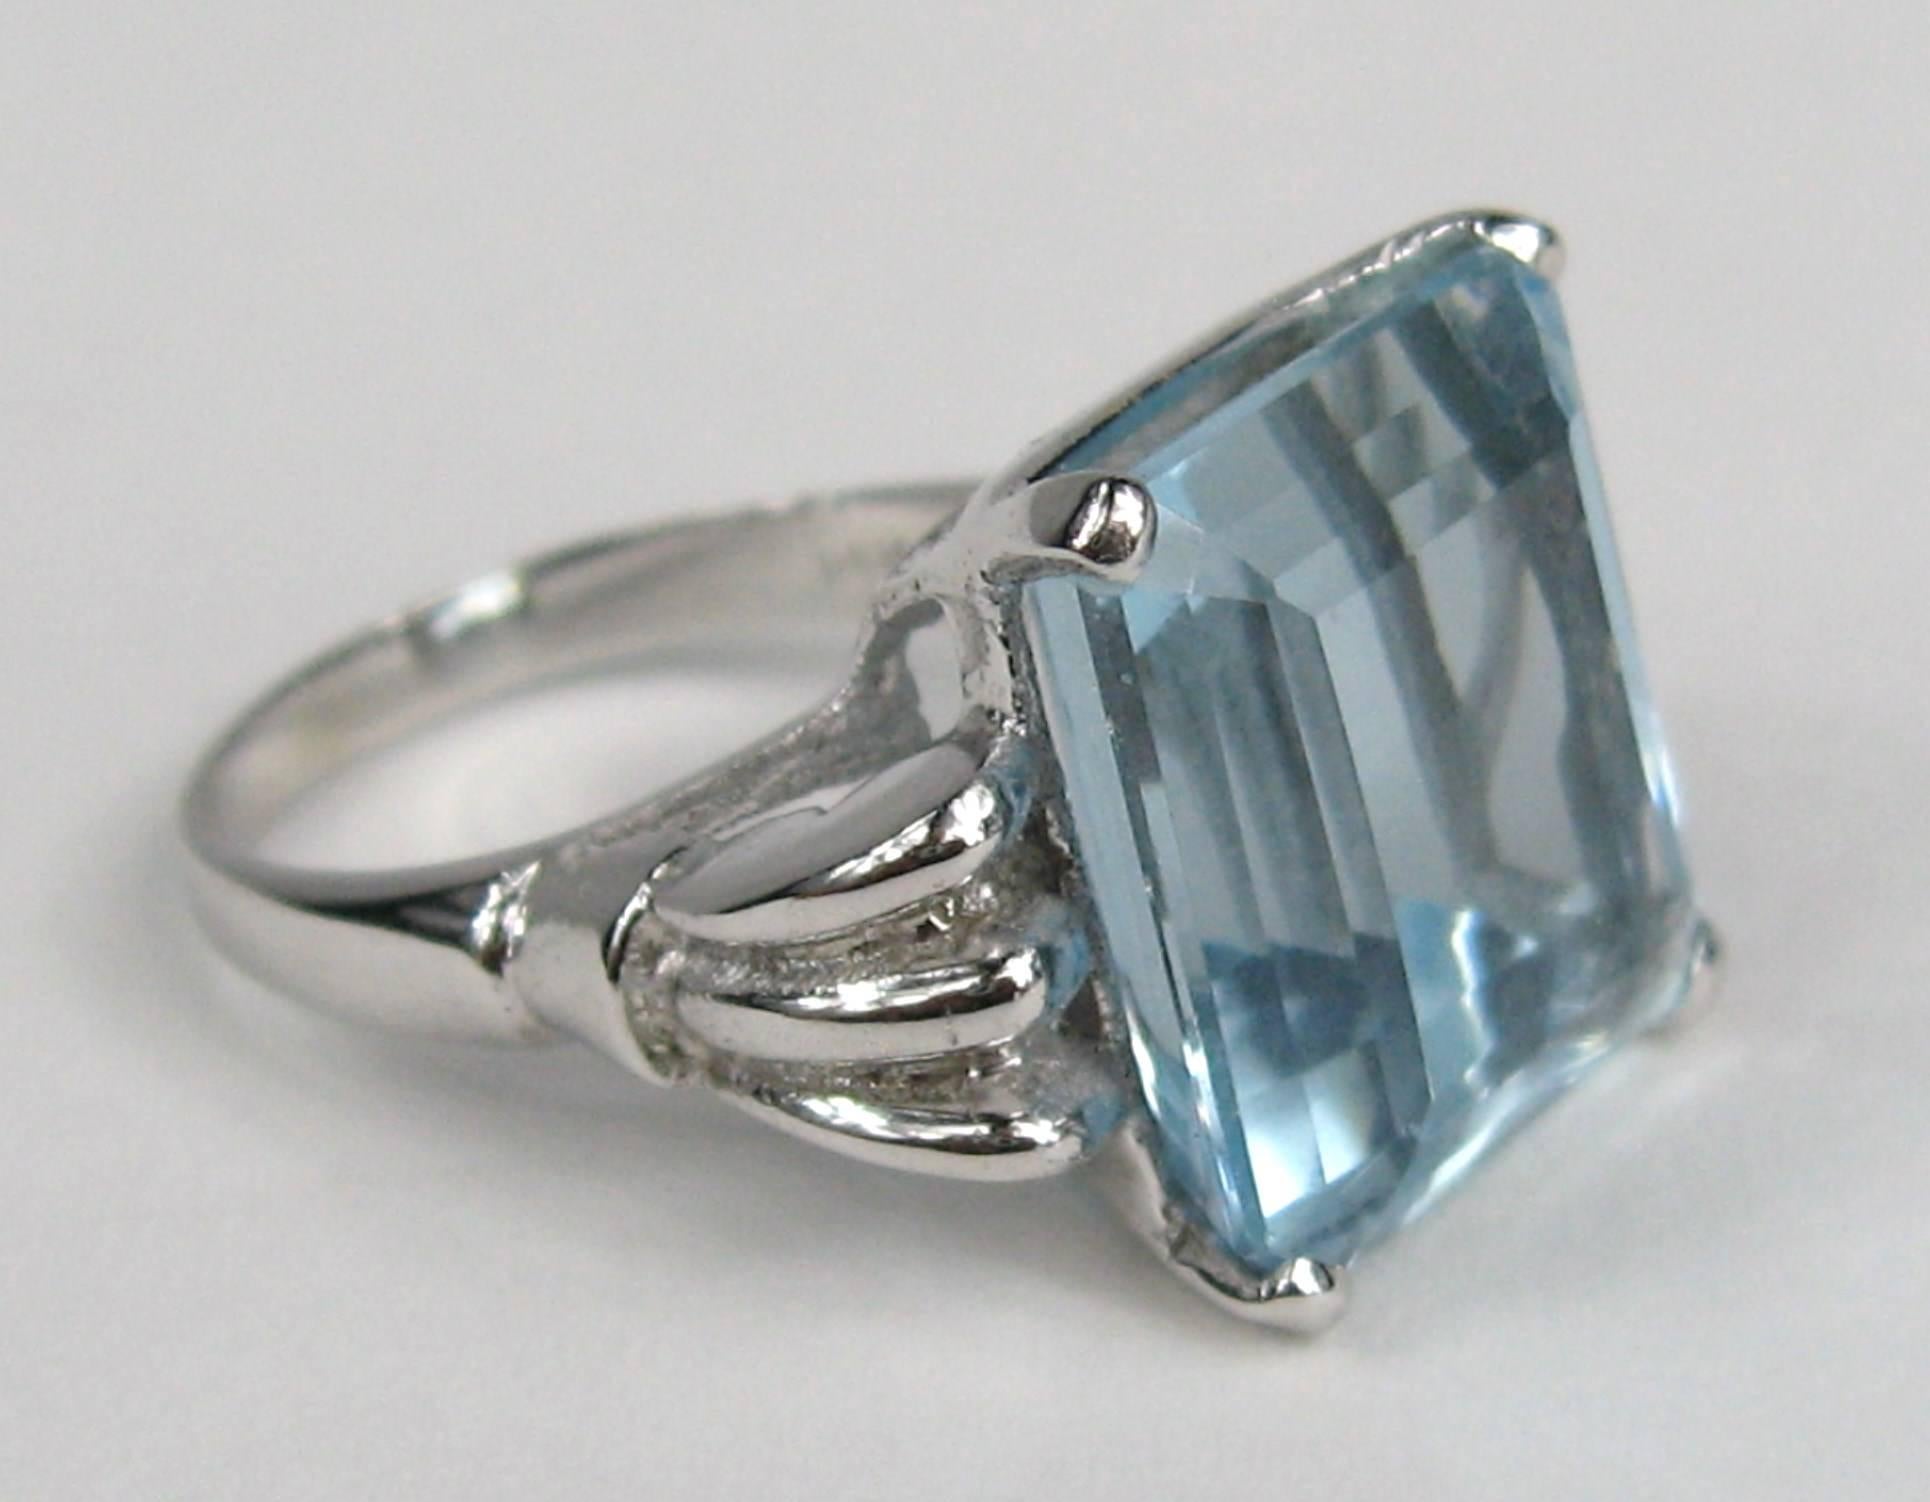 Aquamarine 14 Karat White Gold Ring 13.75 Carat Emerald Cut GIA Certified, 1940s In Good Condition For Sale In Wallkill, NY